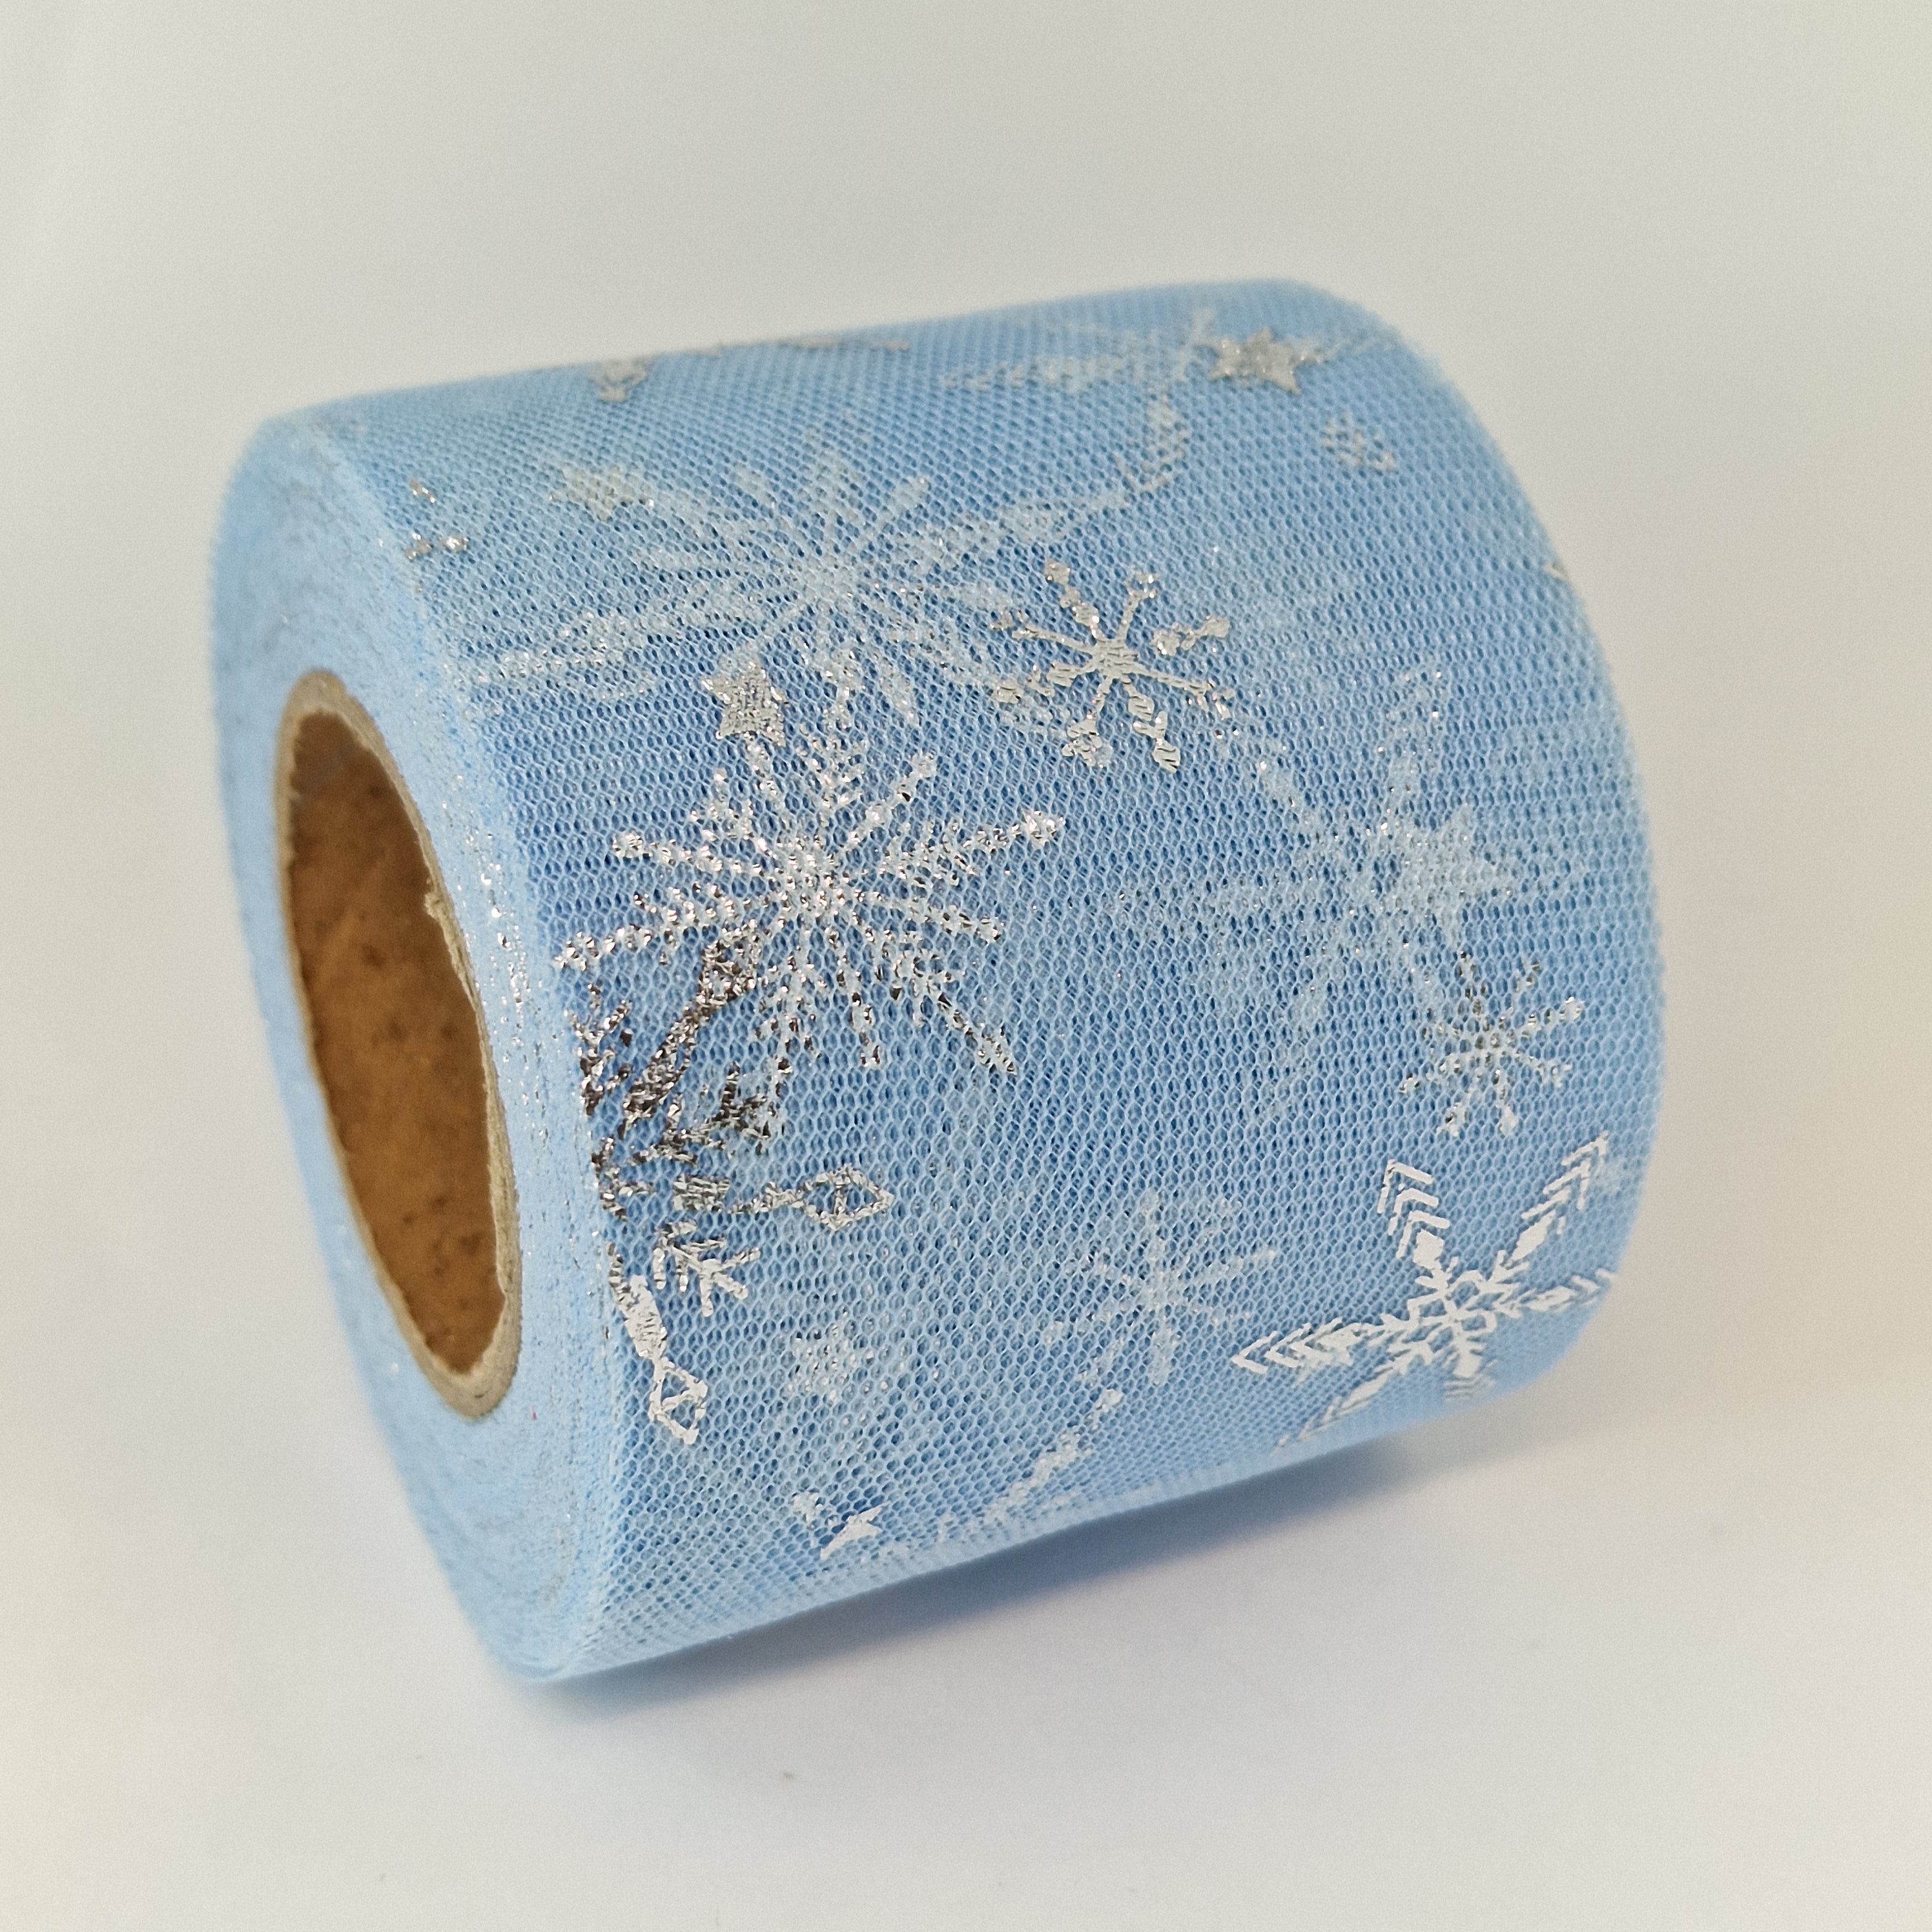 MajorCrafts 60mm 22metres Light Blue with Silver Snowflakes Tulle Mesh Ribbon